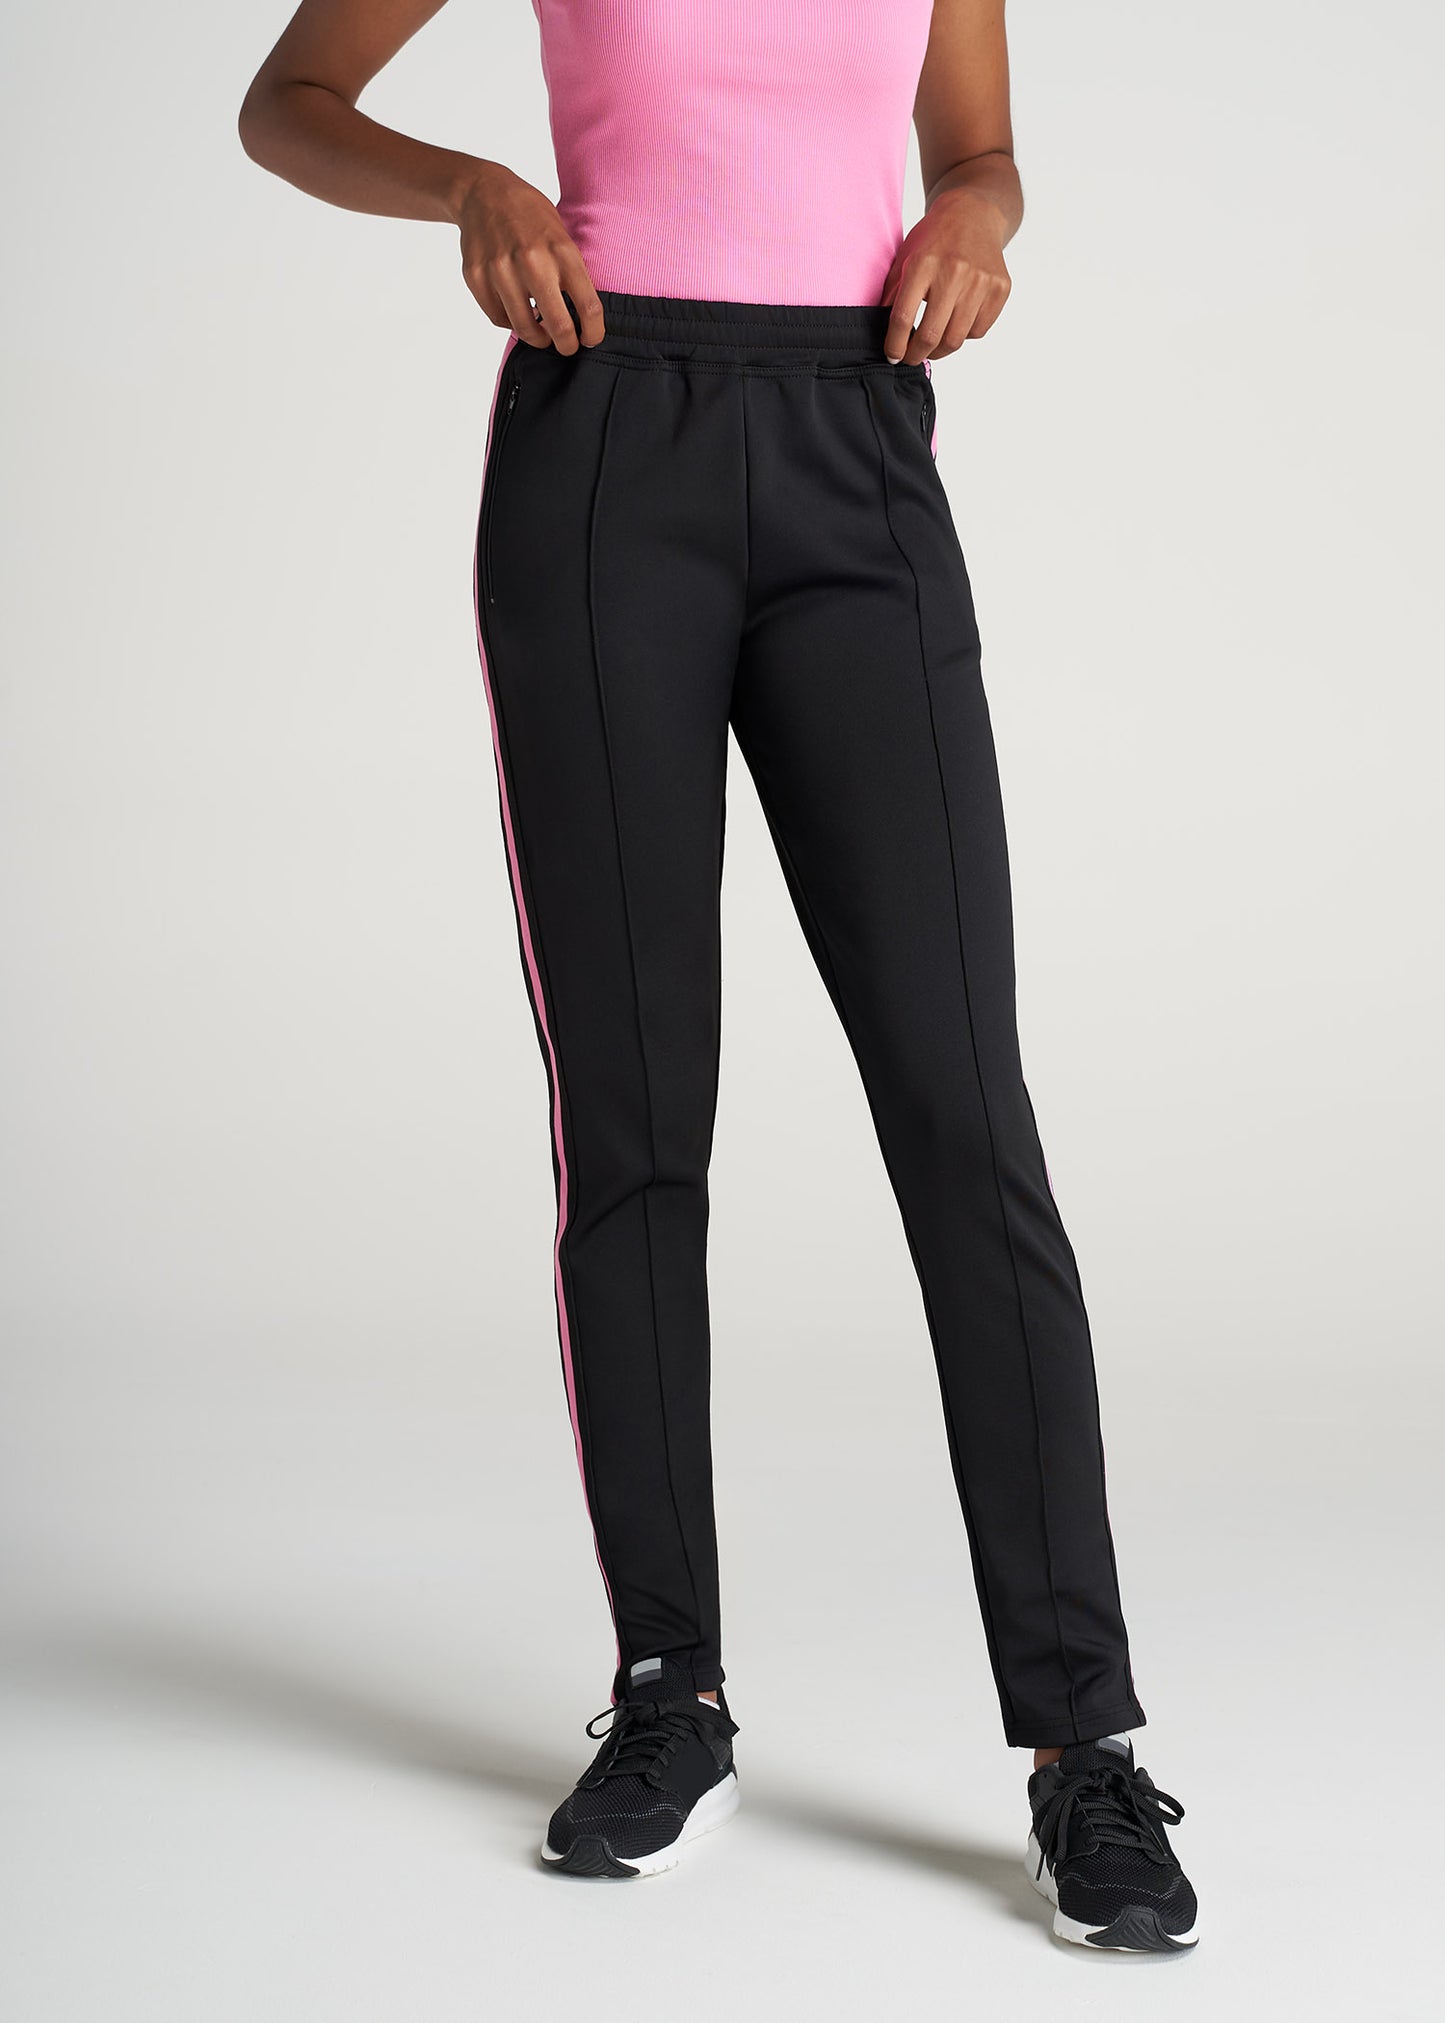 Athletic Wear for Women: Tall Black Pink Stripe Athletic Pant